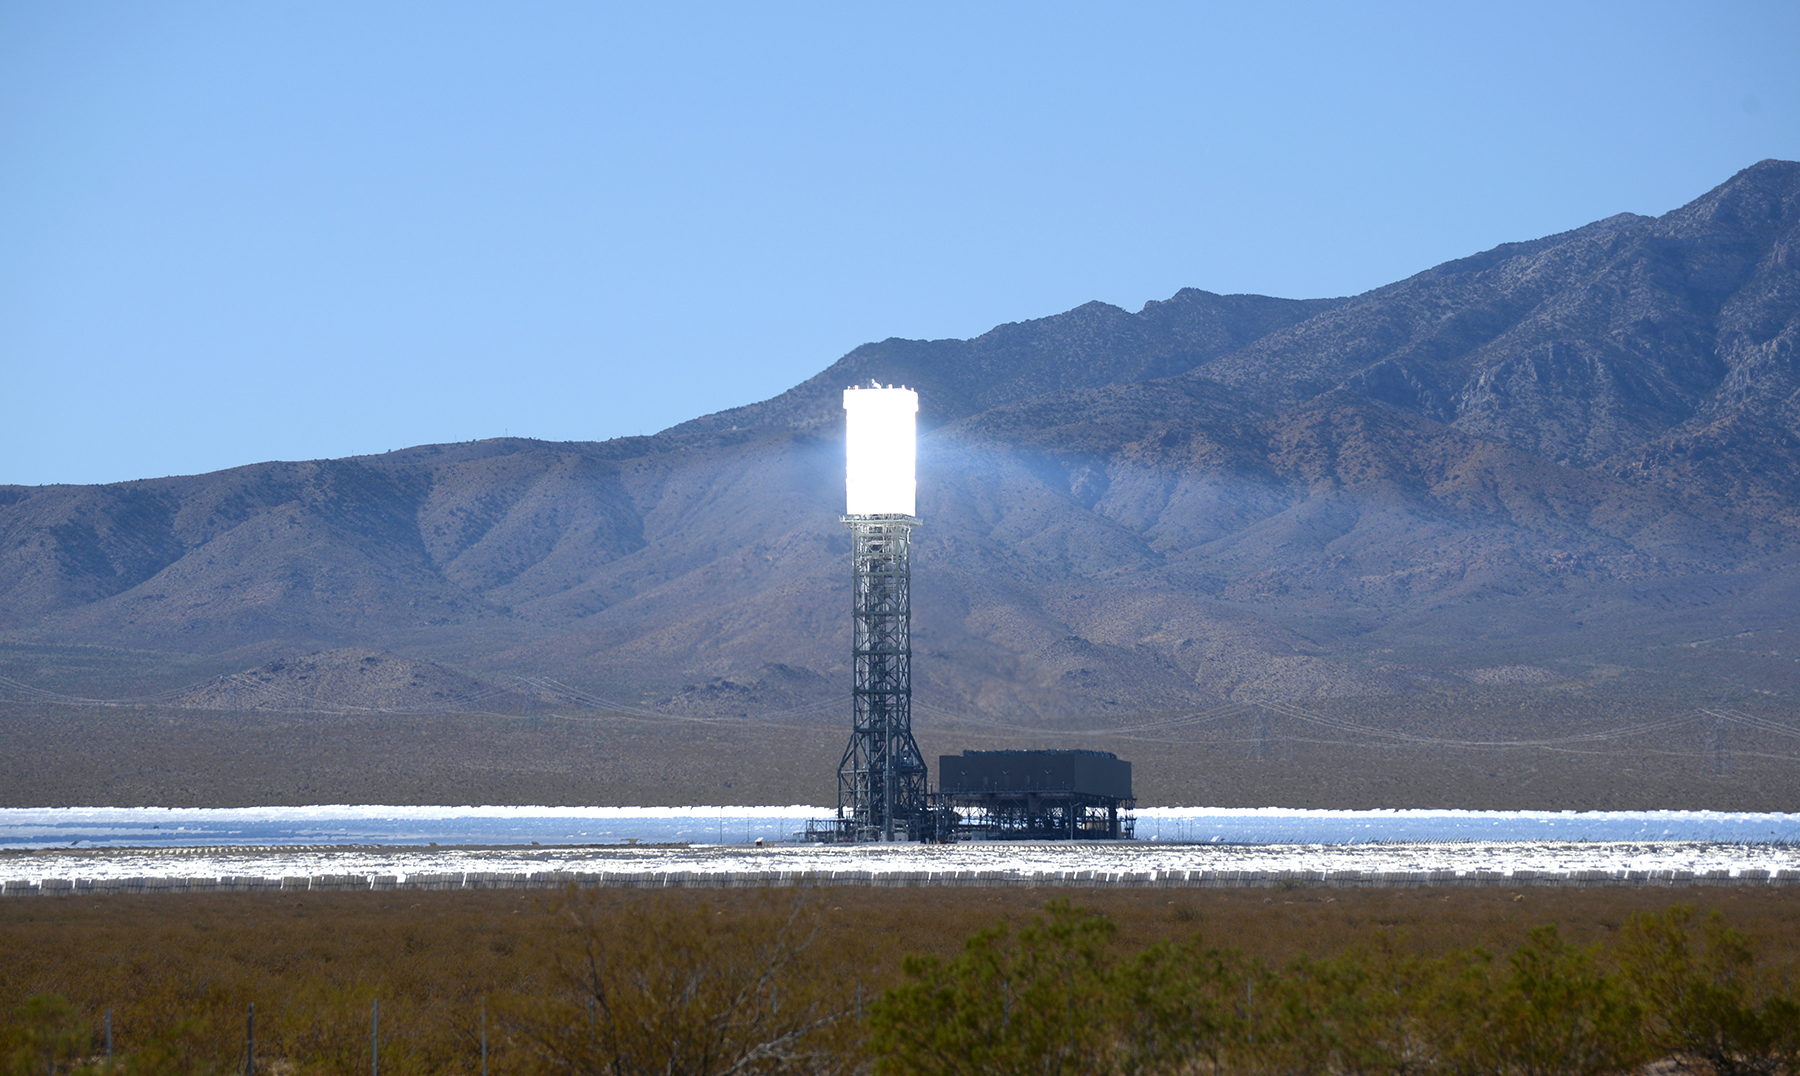 The Ivanpah Solar Power Facility is a concentrated solar-thermal plant in the Mojave Desert near the California-Nevada border. Acres of heliostat mirrors direct sunlight onto receivers located in the three centralized solar towers. The receivers generate steam to drive turbines and generate power. When it opened in 2014, Ivanpah was the world's largest solar-thermal power station. In 2019 it produced 772,214 MWh of electricity. (Photo by Laura Ockel on Unsplash)